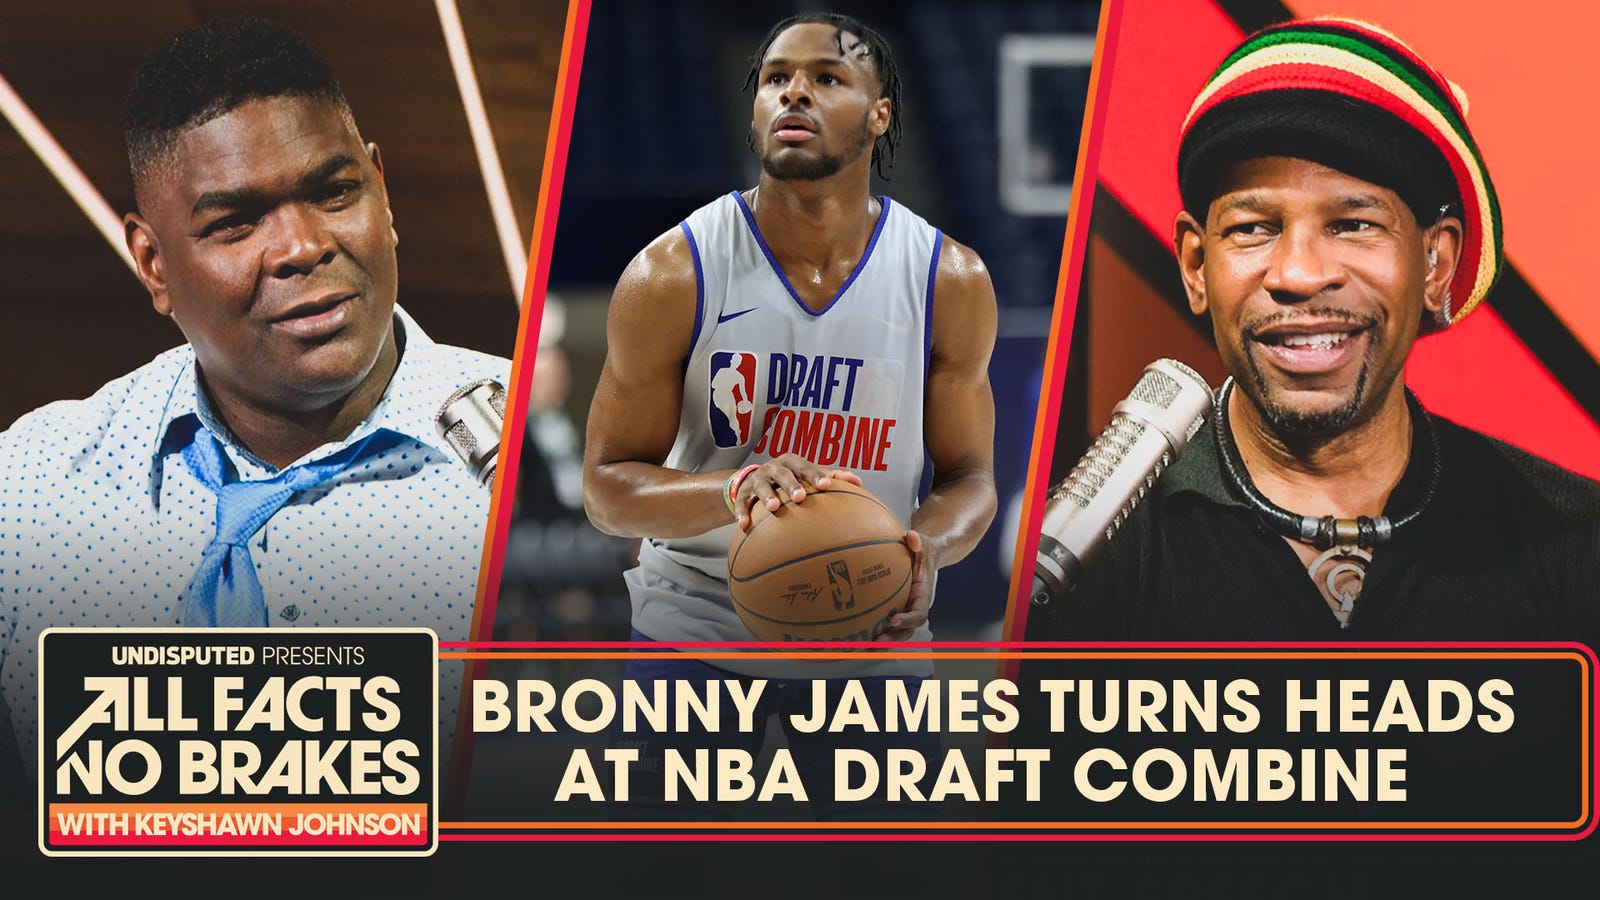 Bronny James turns heads at NBA Draft combine, will he prove haters wrong? 